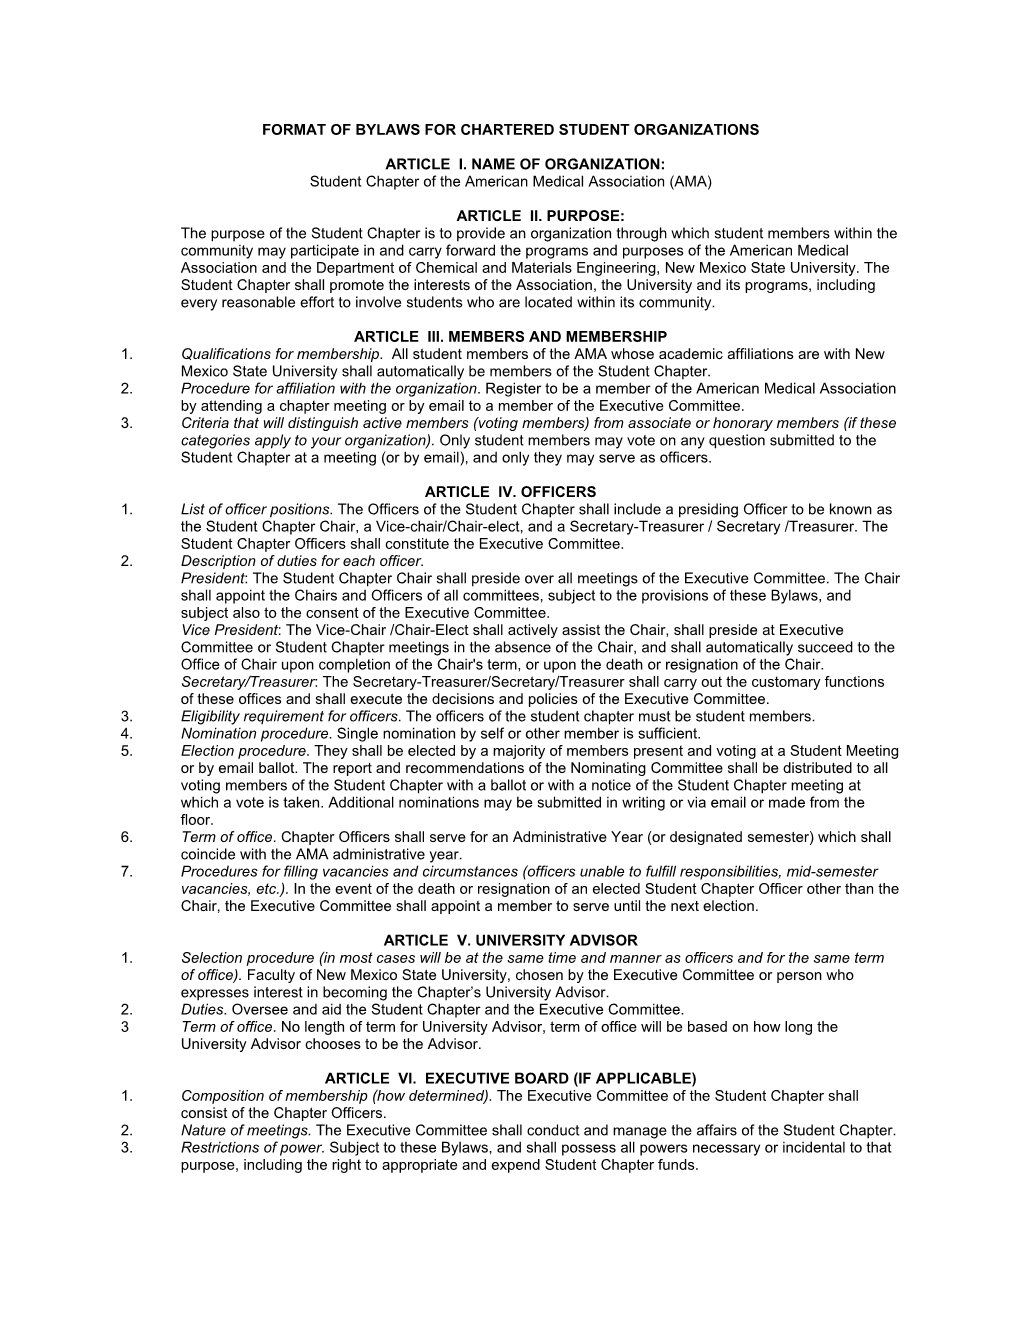 Format of Bylaws for Chartered Student Organizations